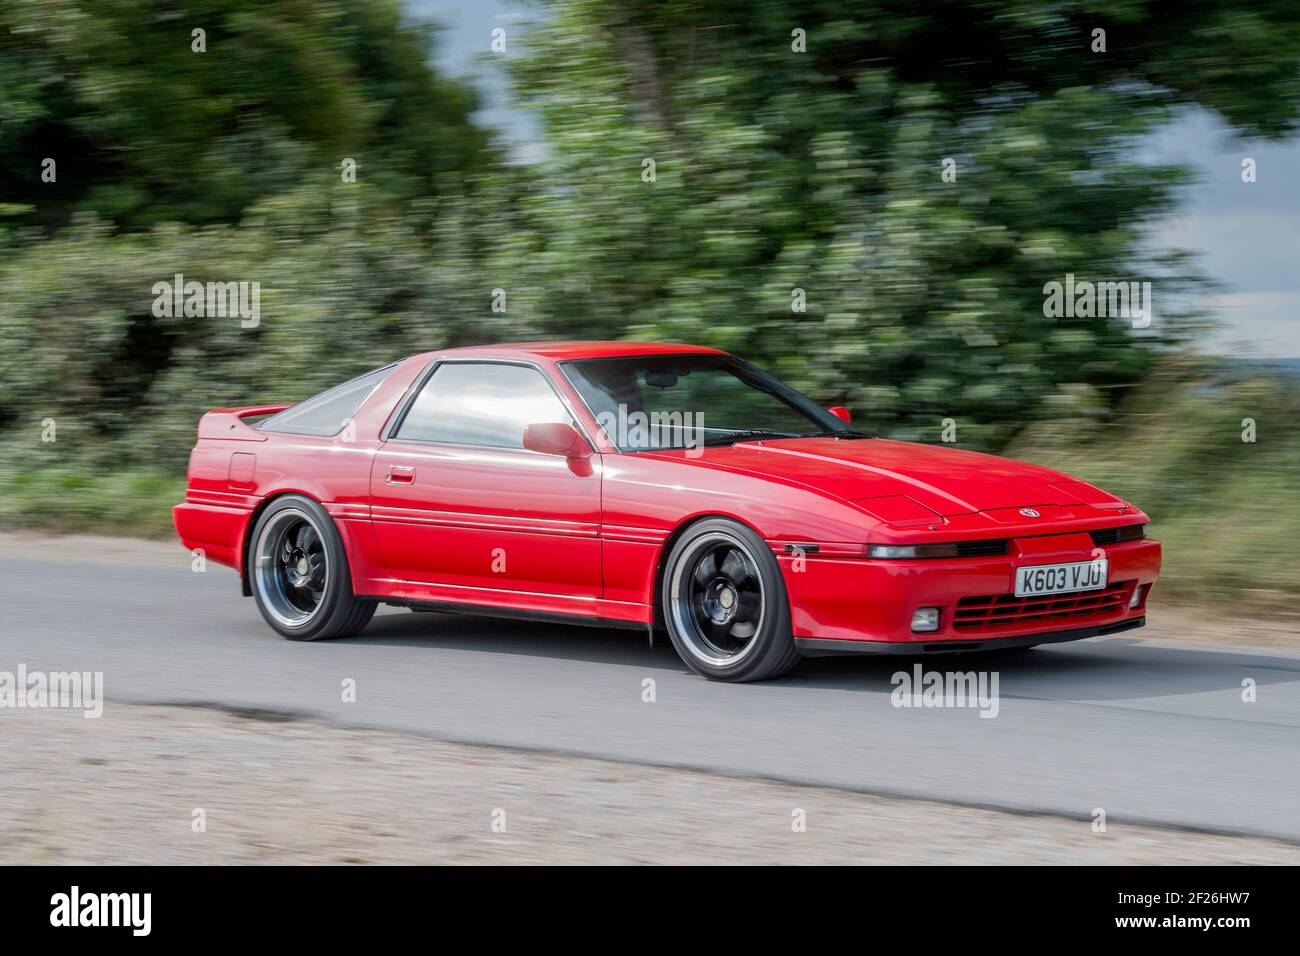 Japanese Cars 1990s High Resolution Stock Photography And Images Alamy